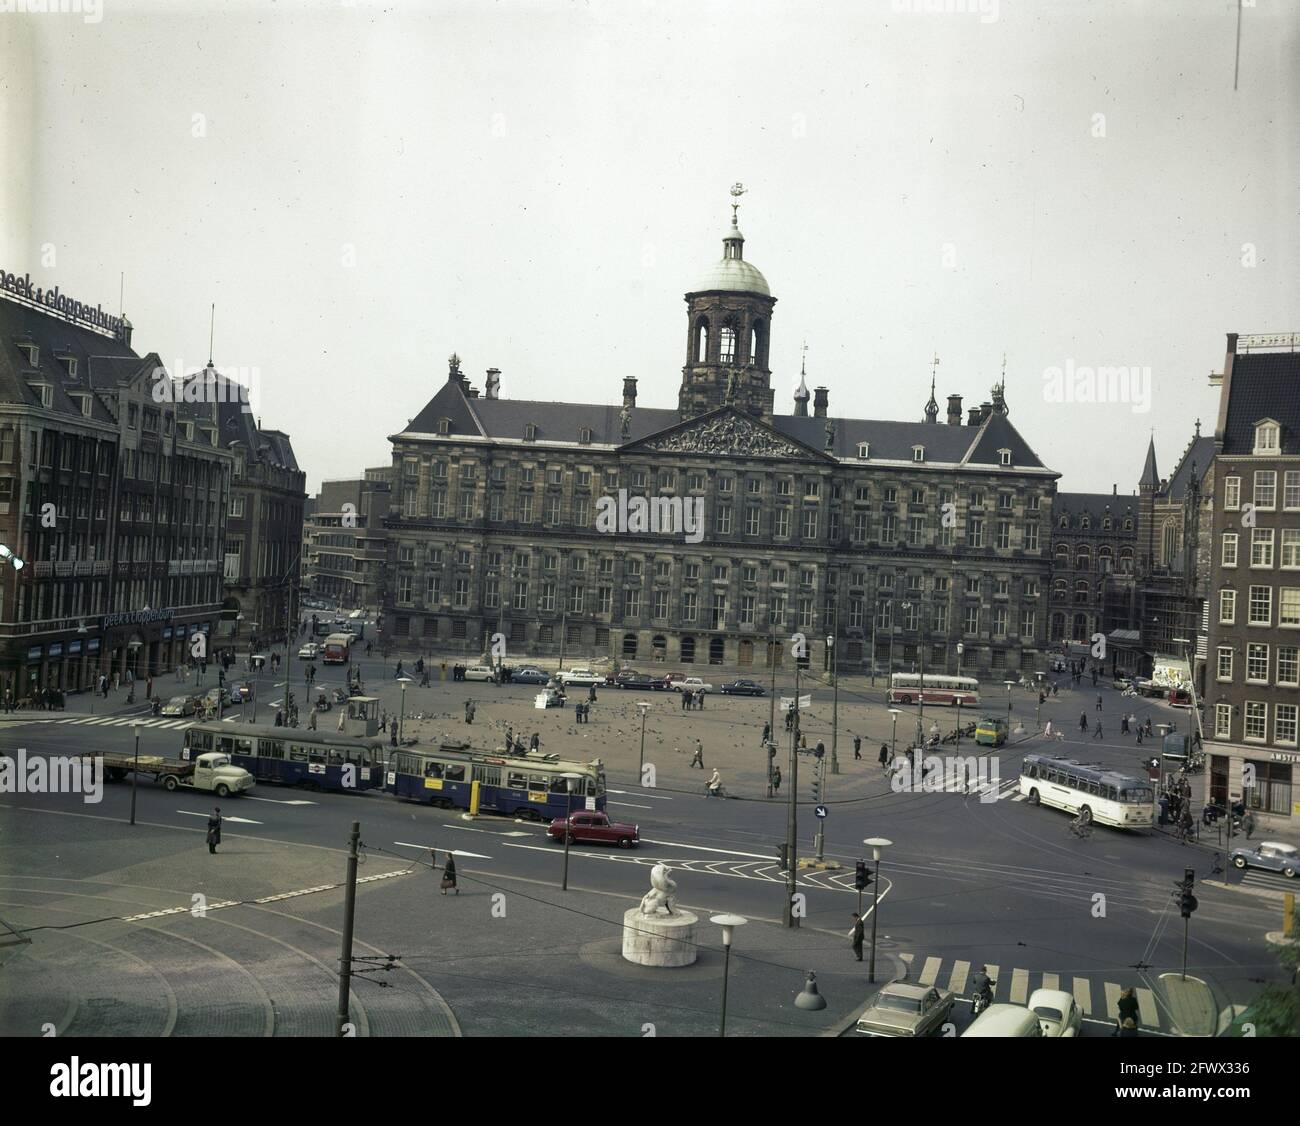 Amsterdam. The Dam with the royal palace, September 29, 1965, baroque, classicism, domes, palaces, squares, cityscapes, streetcars, traffic, The Netherlands, 20th century press agency photo, news to remember, documentary, historic photography 1945-1990, visual stories, human history of the Twentieth Century, capturing moments in time Stock Photo